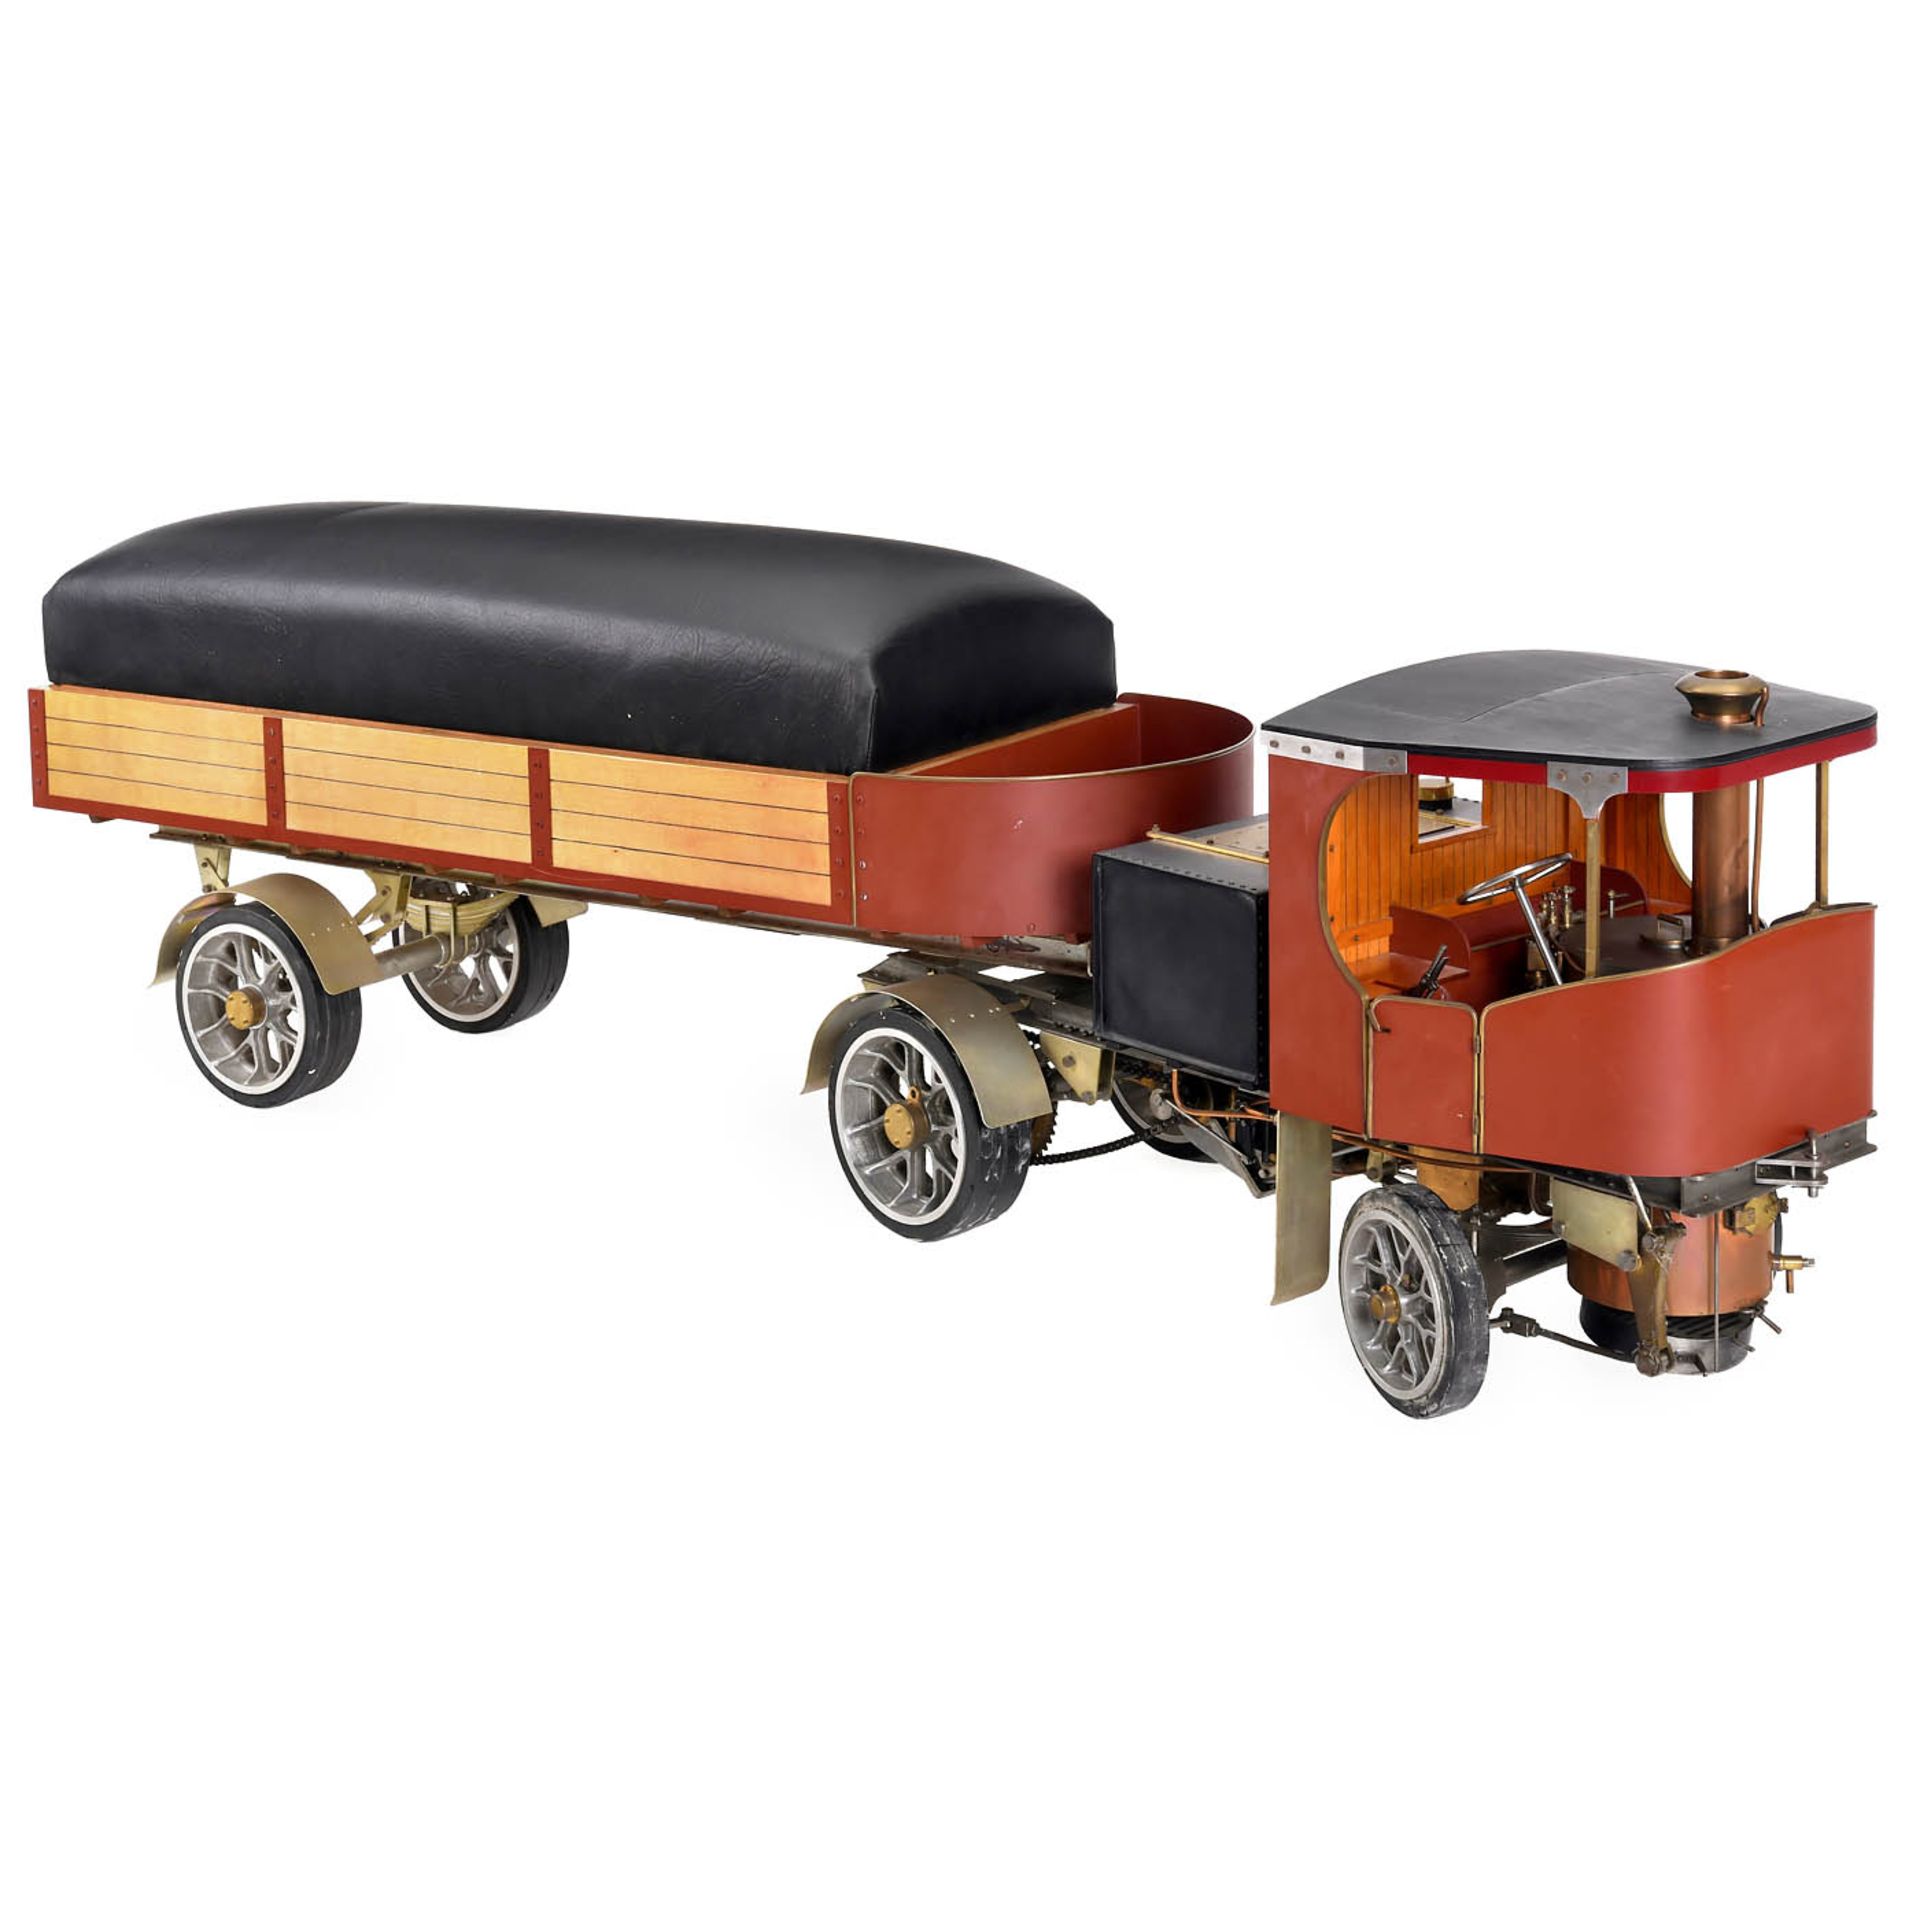 Two-Inch Scale Model of a Clayton Undertype Steam Wagon with Trailer - Image 2 of 6